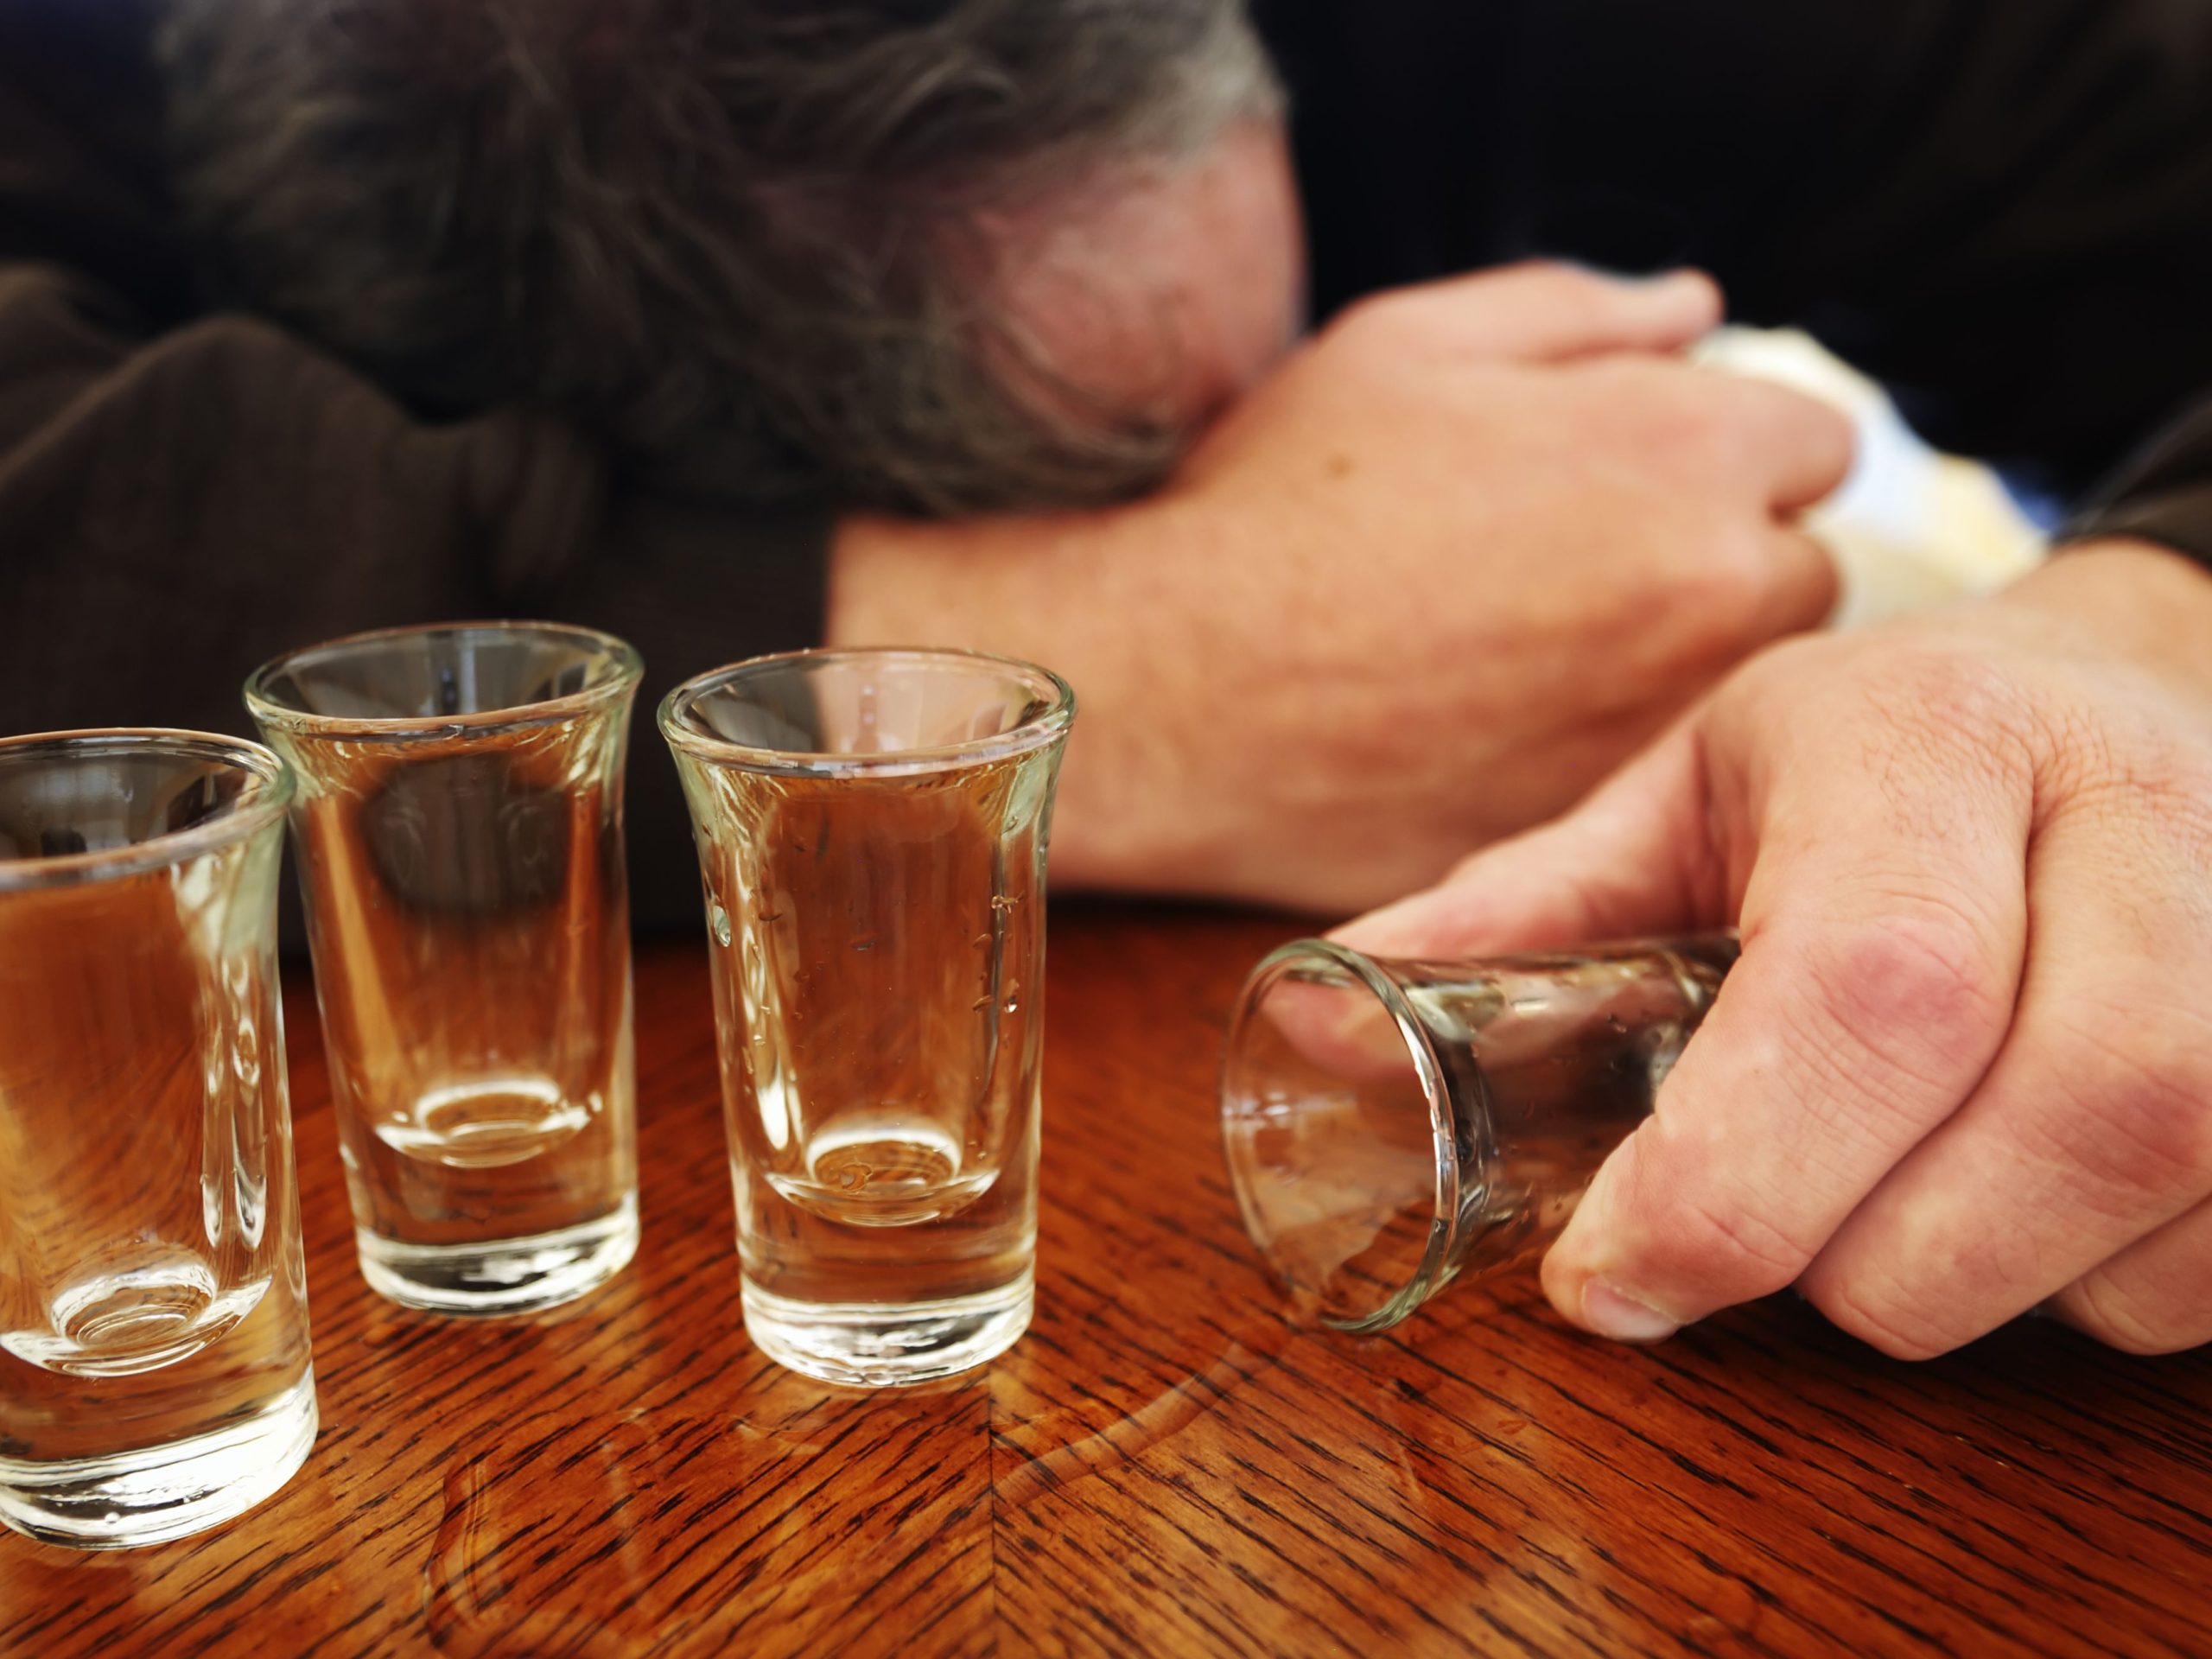 The Simple Test To Know If You Have An Alcohol Problem